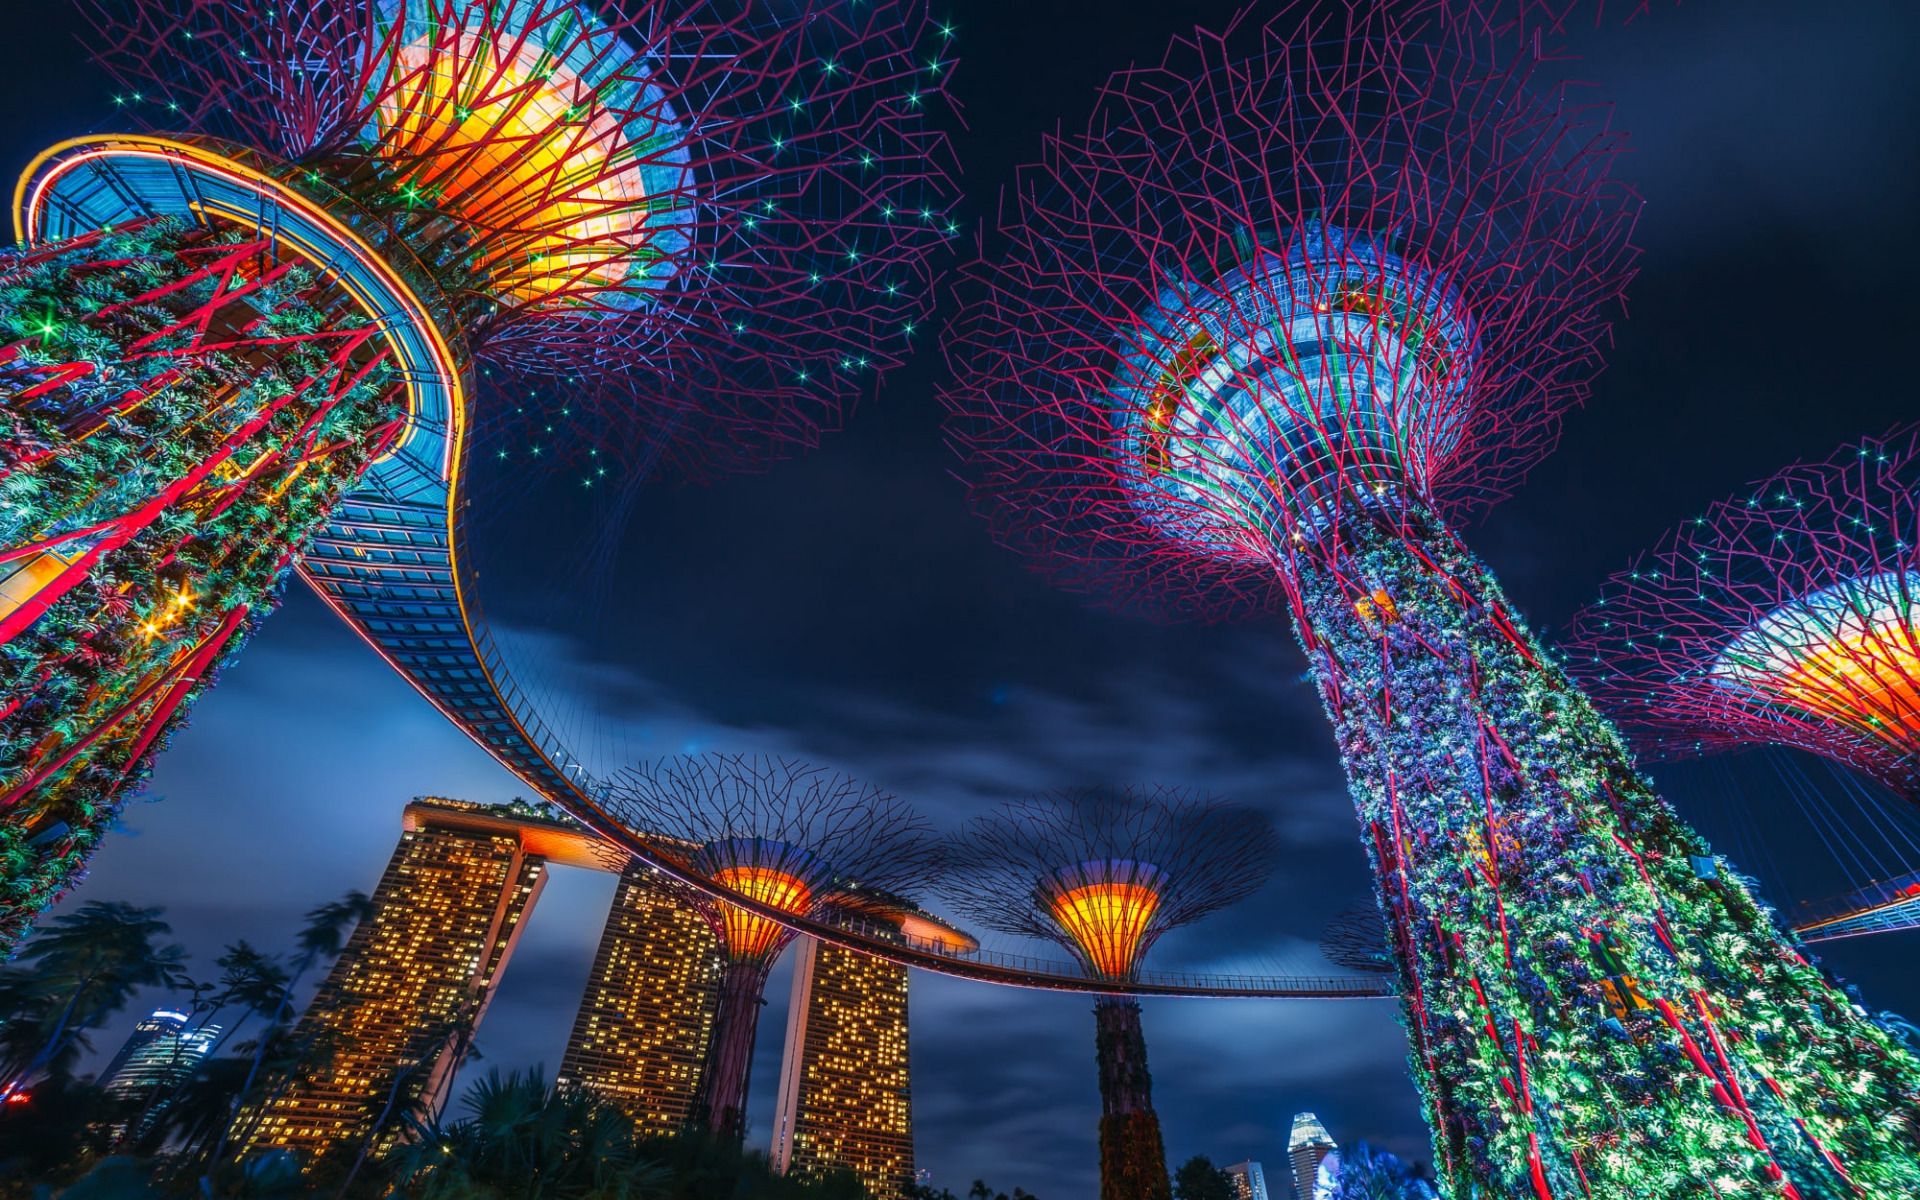 Download wallpaper Singapore, Supertree Grove, Marina Bay Sands, evening, sunset, creative trees, Gardens by the Bay, Marina Gardens for desktop with resolution 1920x1200. High Quality HD picture wallpaper